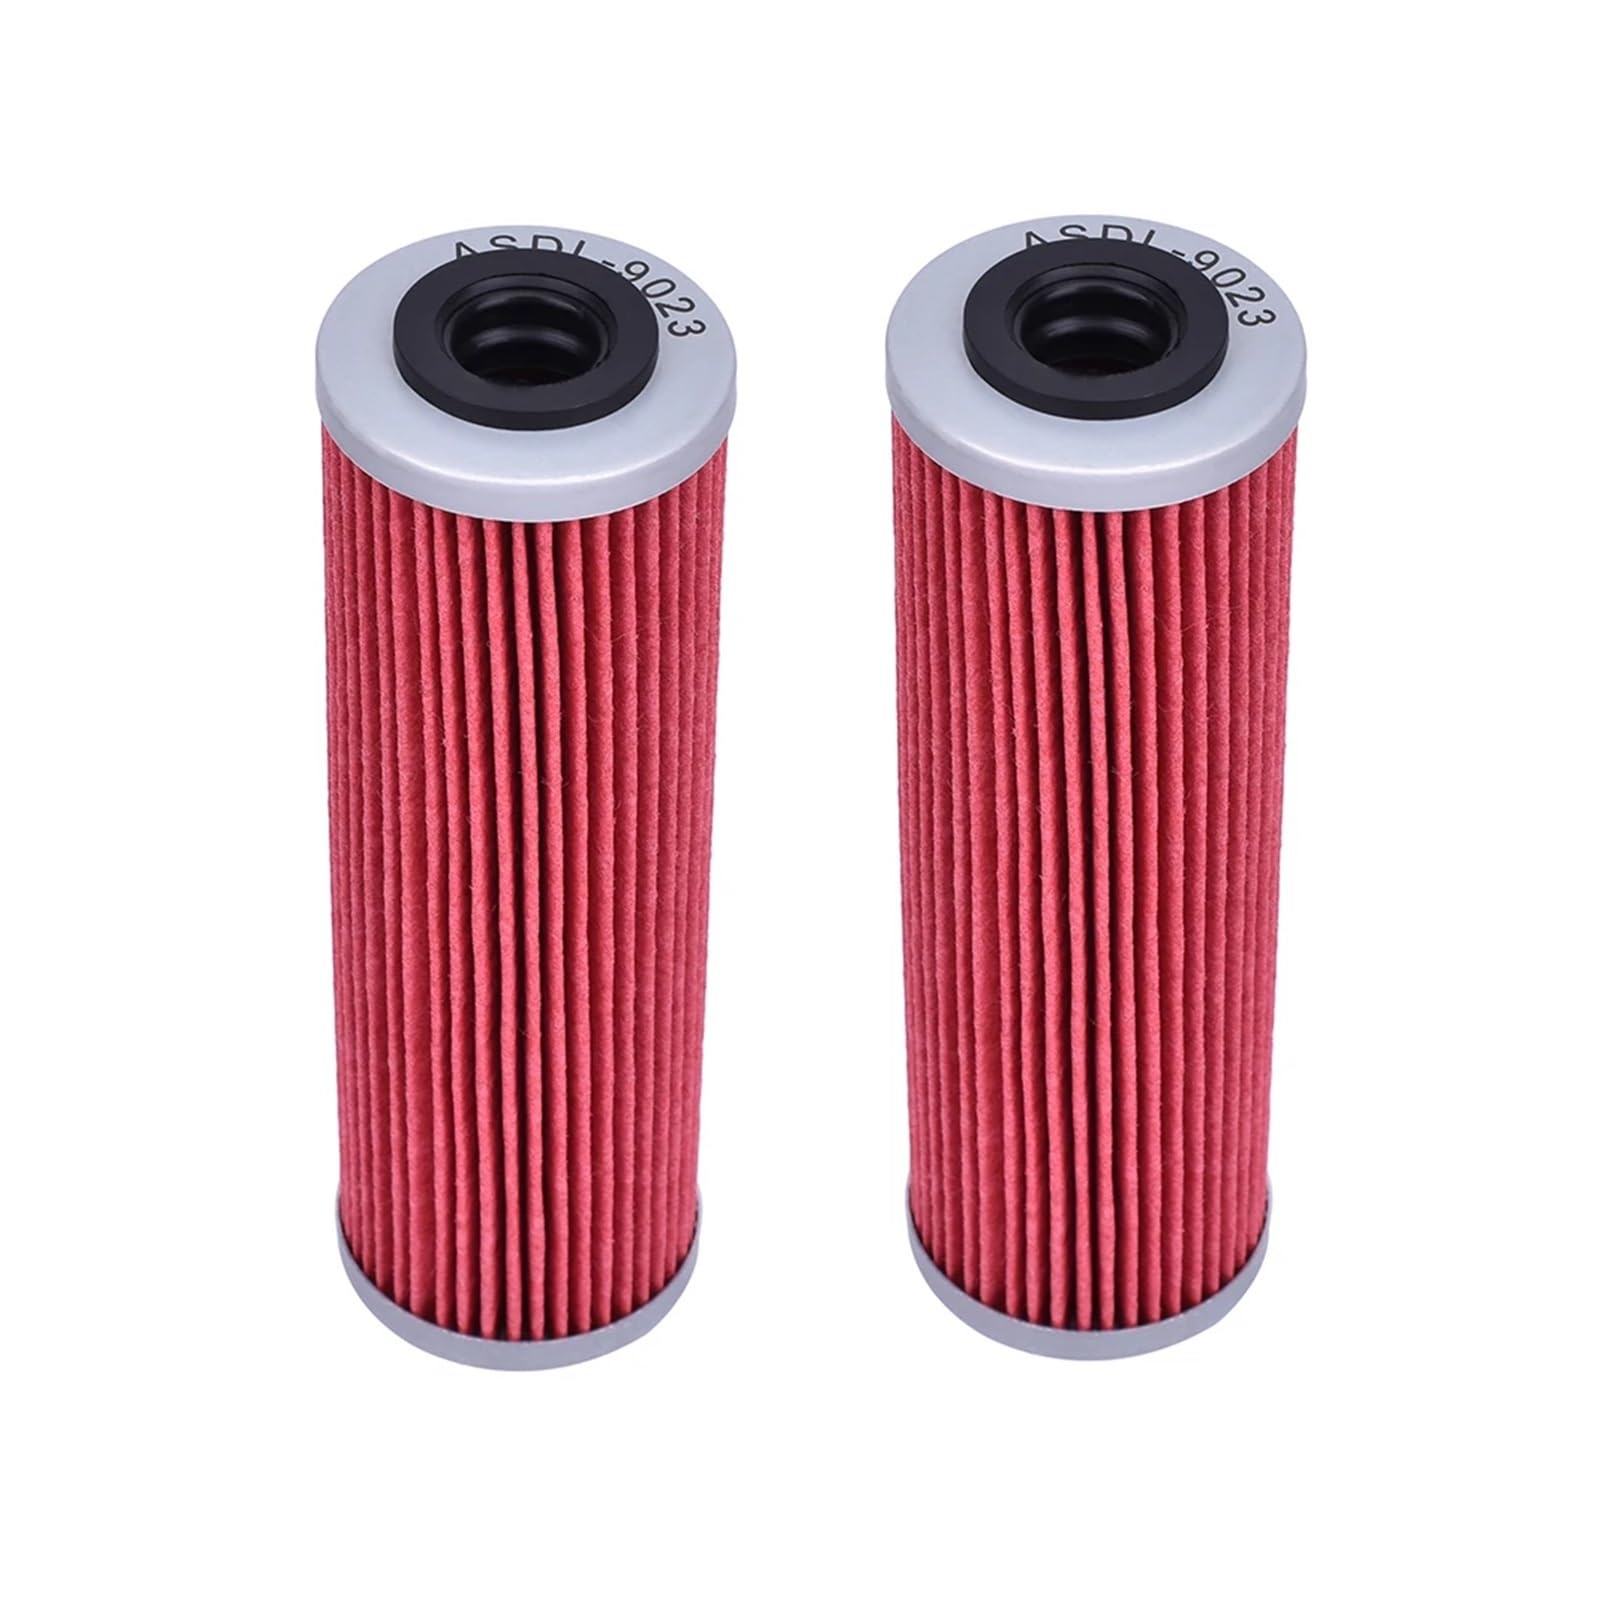 43 mm x 130 mm Motorrad-Ölfilter for 1299 Panigale S ABS 2015–2017 1299 Panigale R Final Edition 2018 OEM 444.4.029.1C(2pcs Red) von VJAIHOA